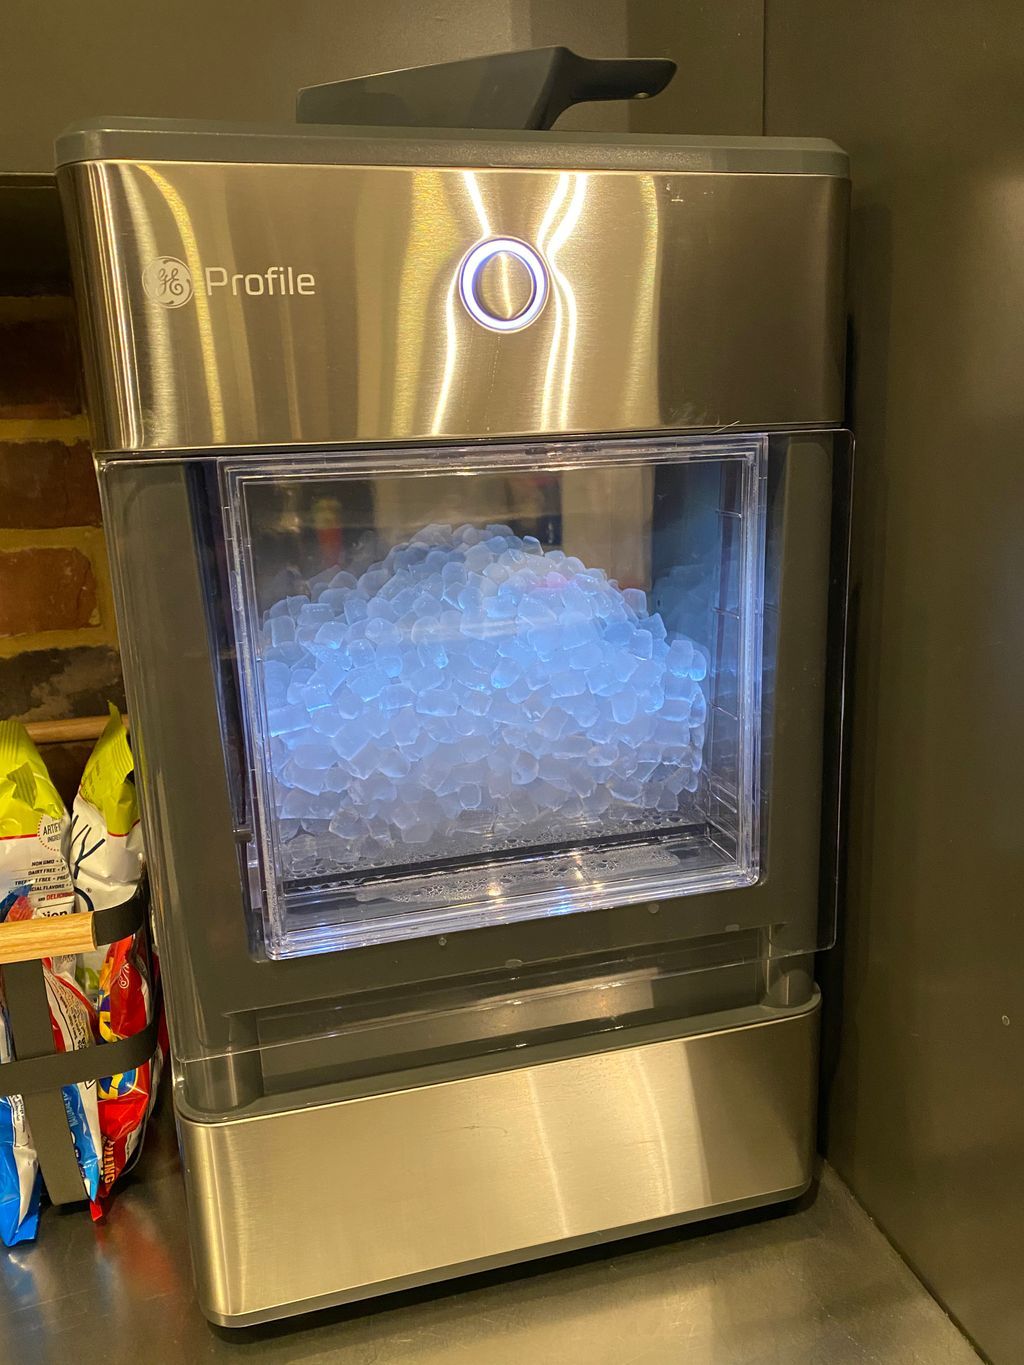 Jon Acuff - My friend got a small ice maker that makes that @sonicdrivein  style ice and I've never been so jealous of a countertop appliance in my  life. (My previous jealousy